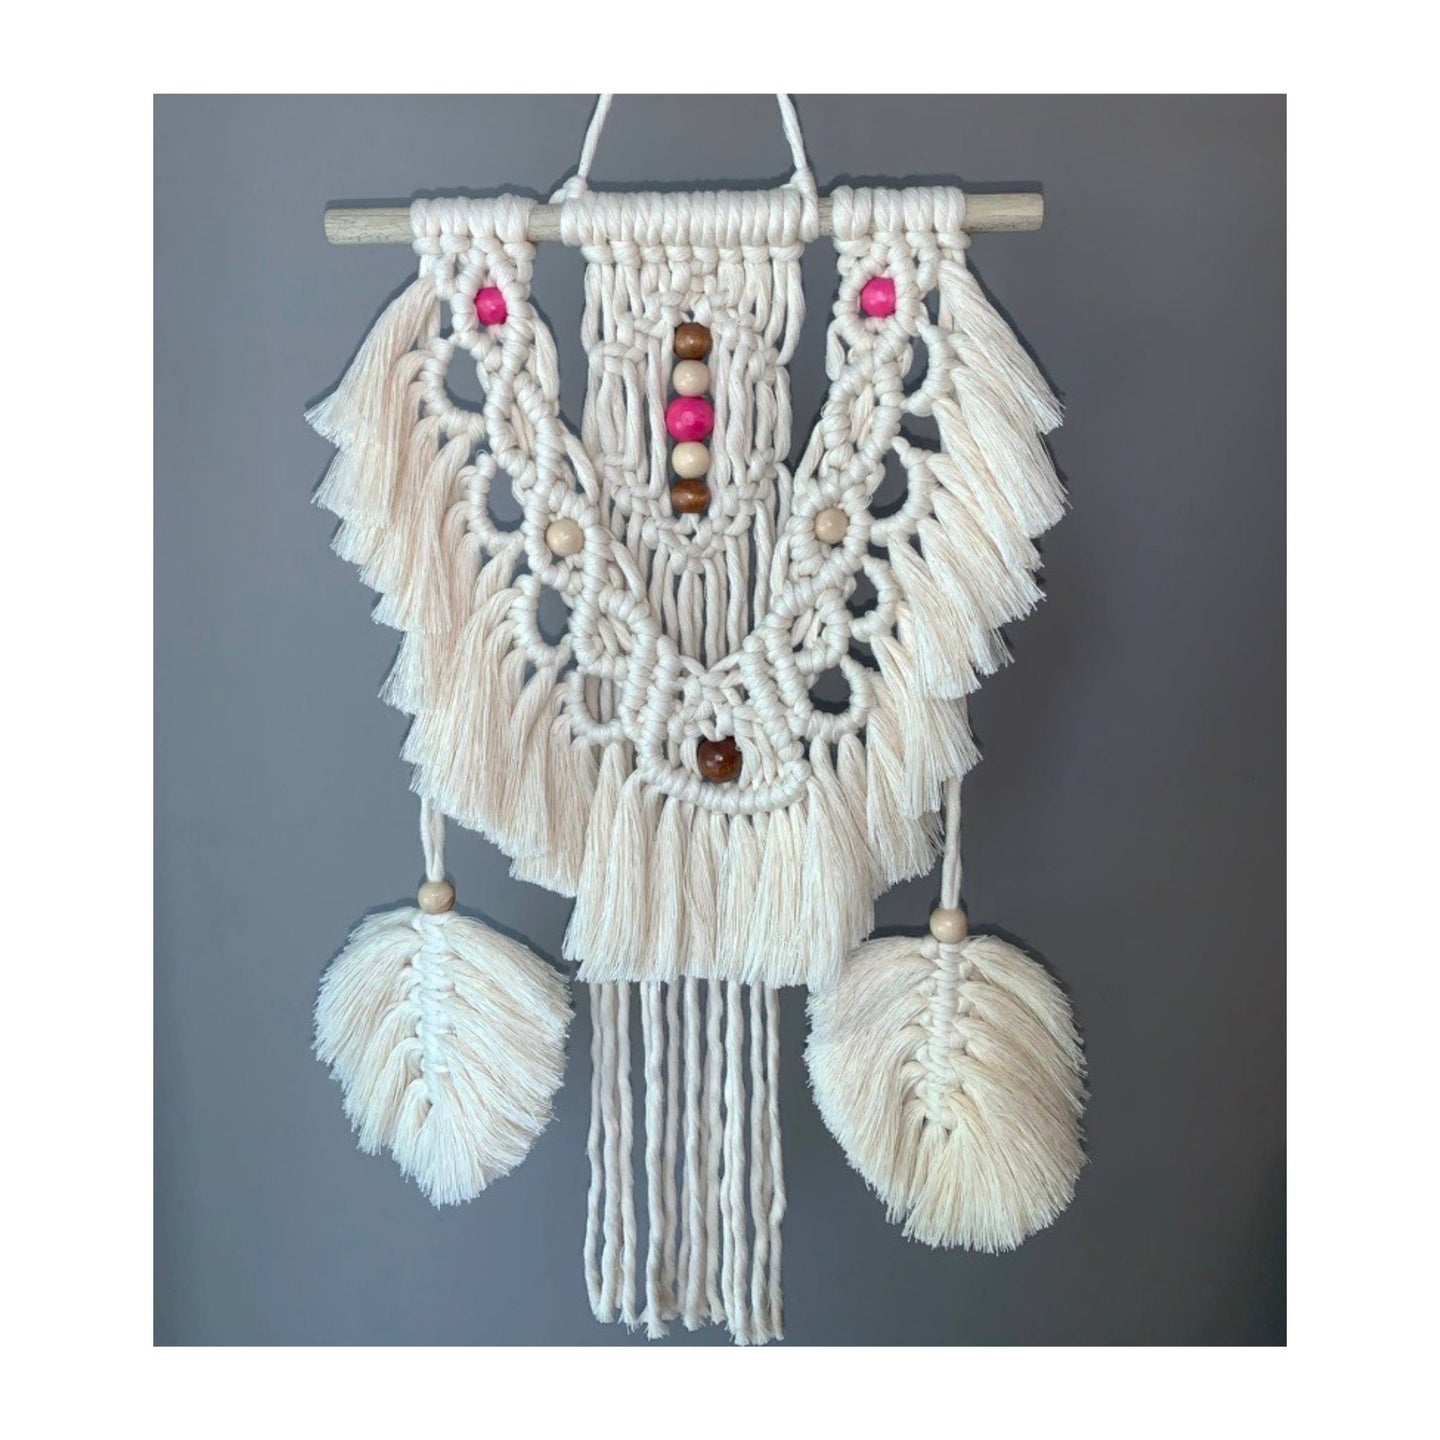 Exhibit this small whimsical macrame fiber art! It’s uniquely paired with two hanging macrame feathers on each side. Beads will be ALL tan. Option to change feather colors is available.